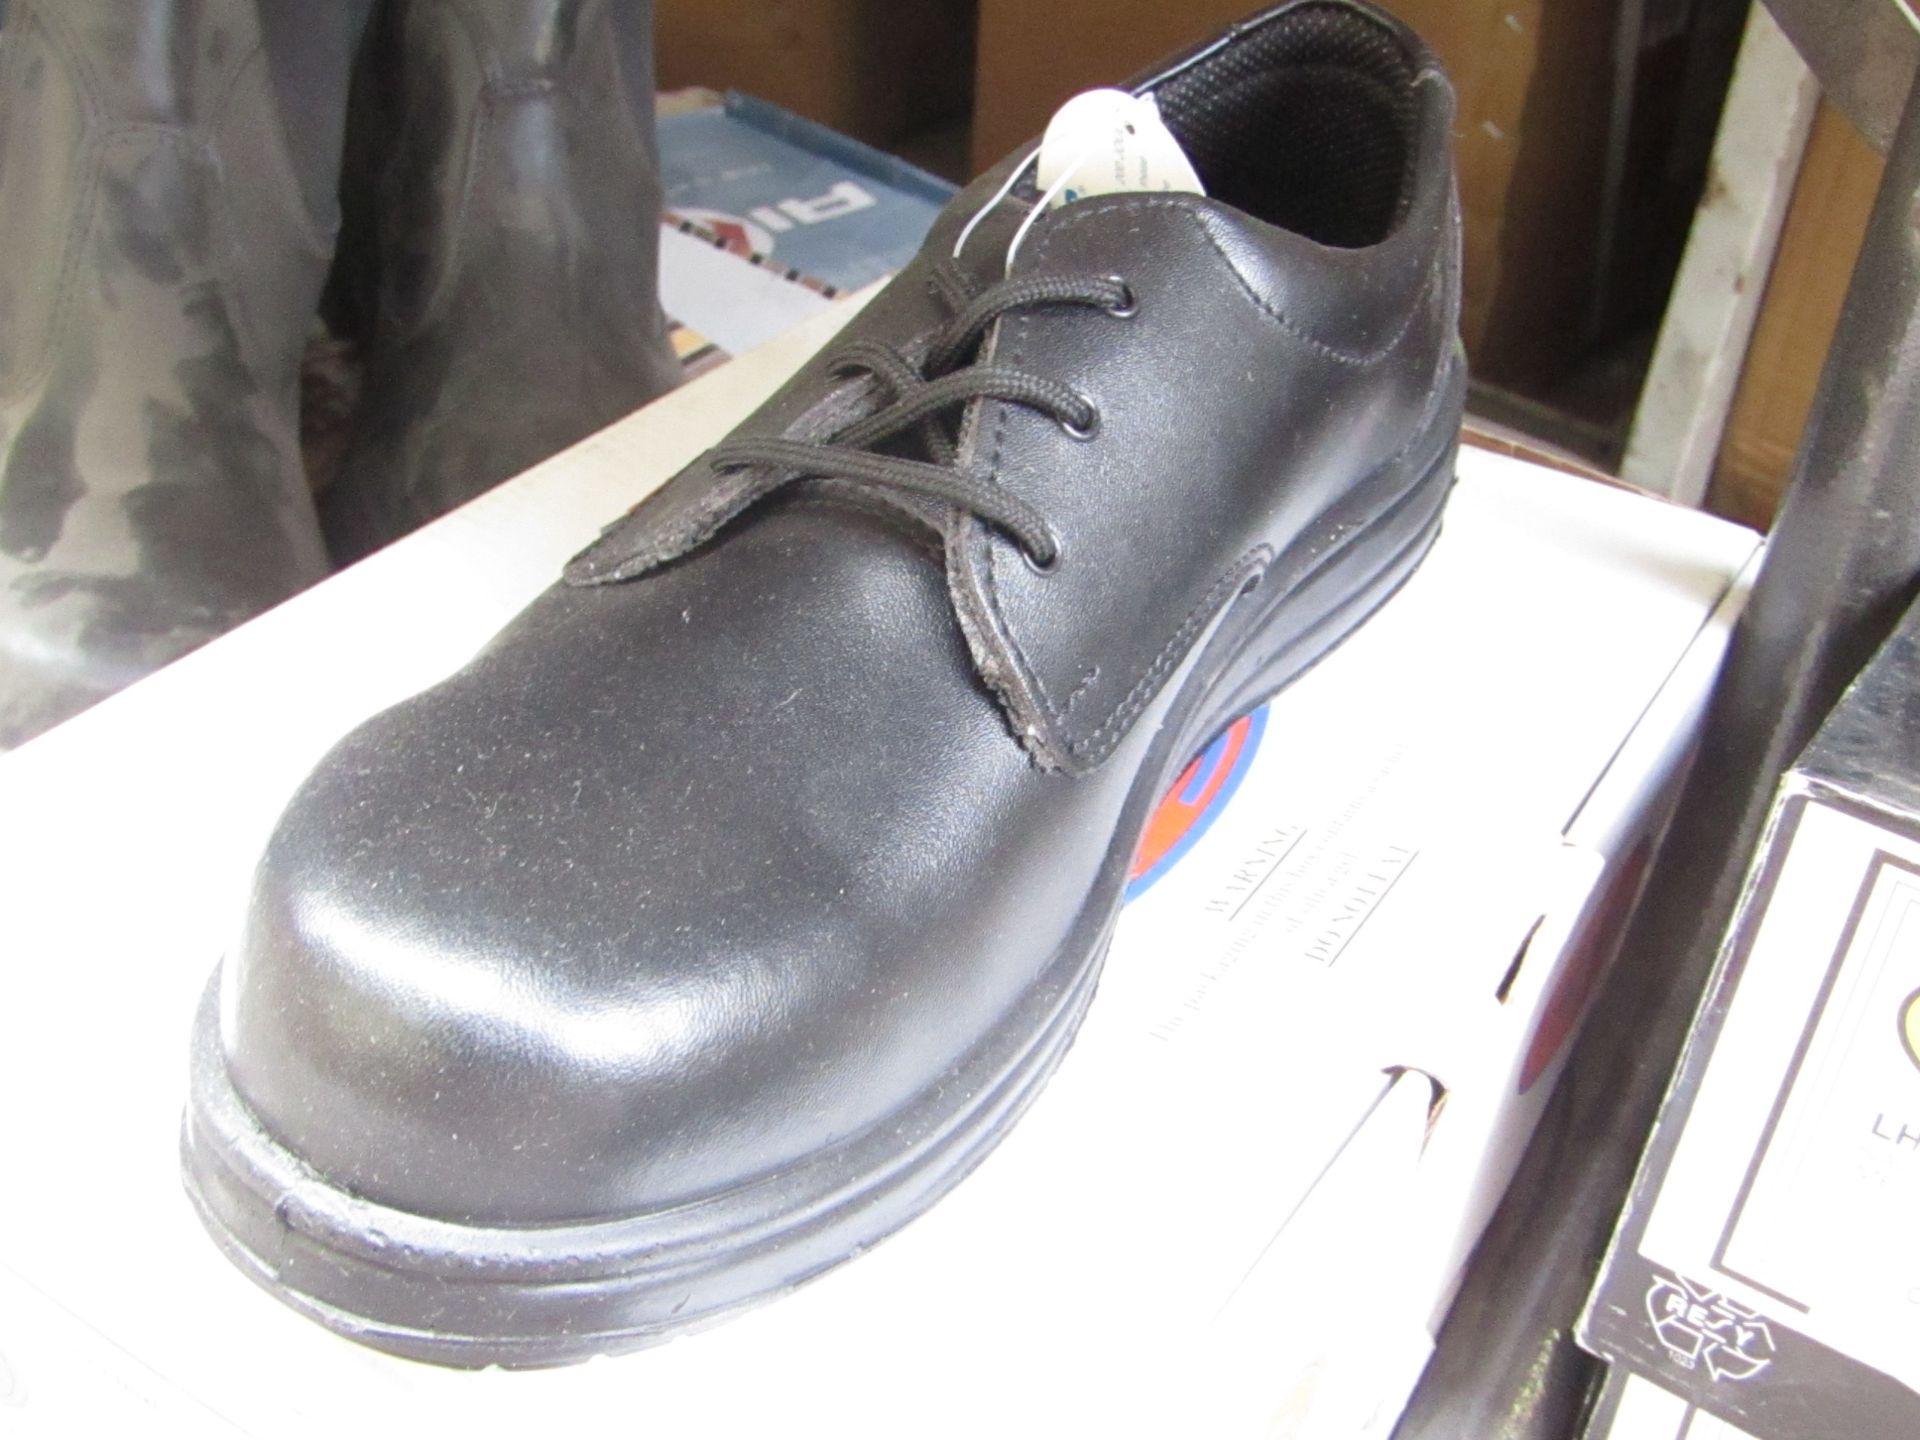 ABS steel toe cap laced shoes, size 8, new and boxed.